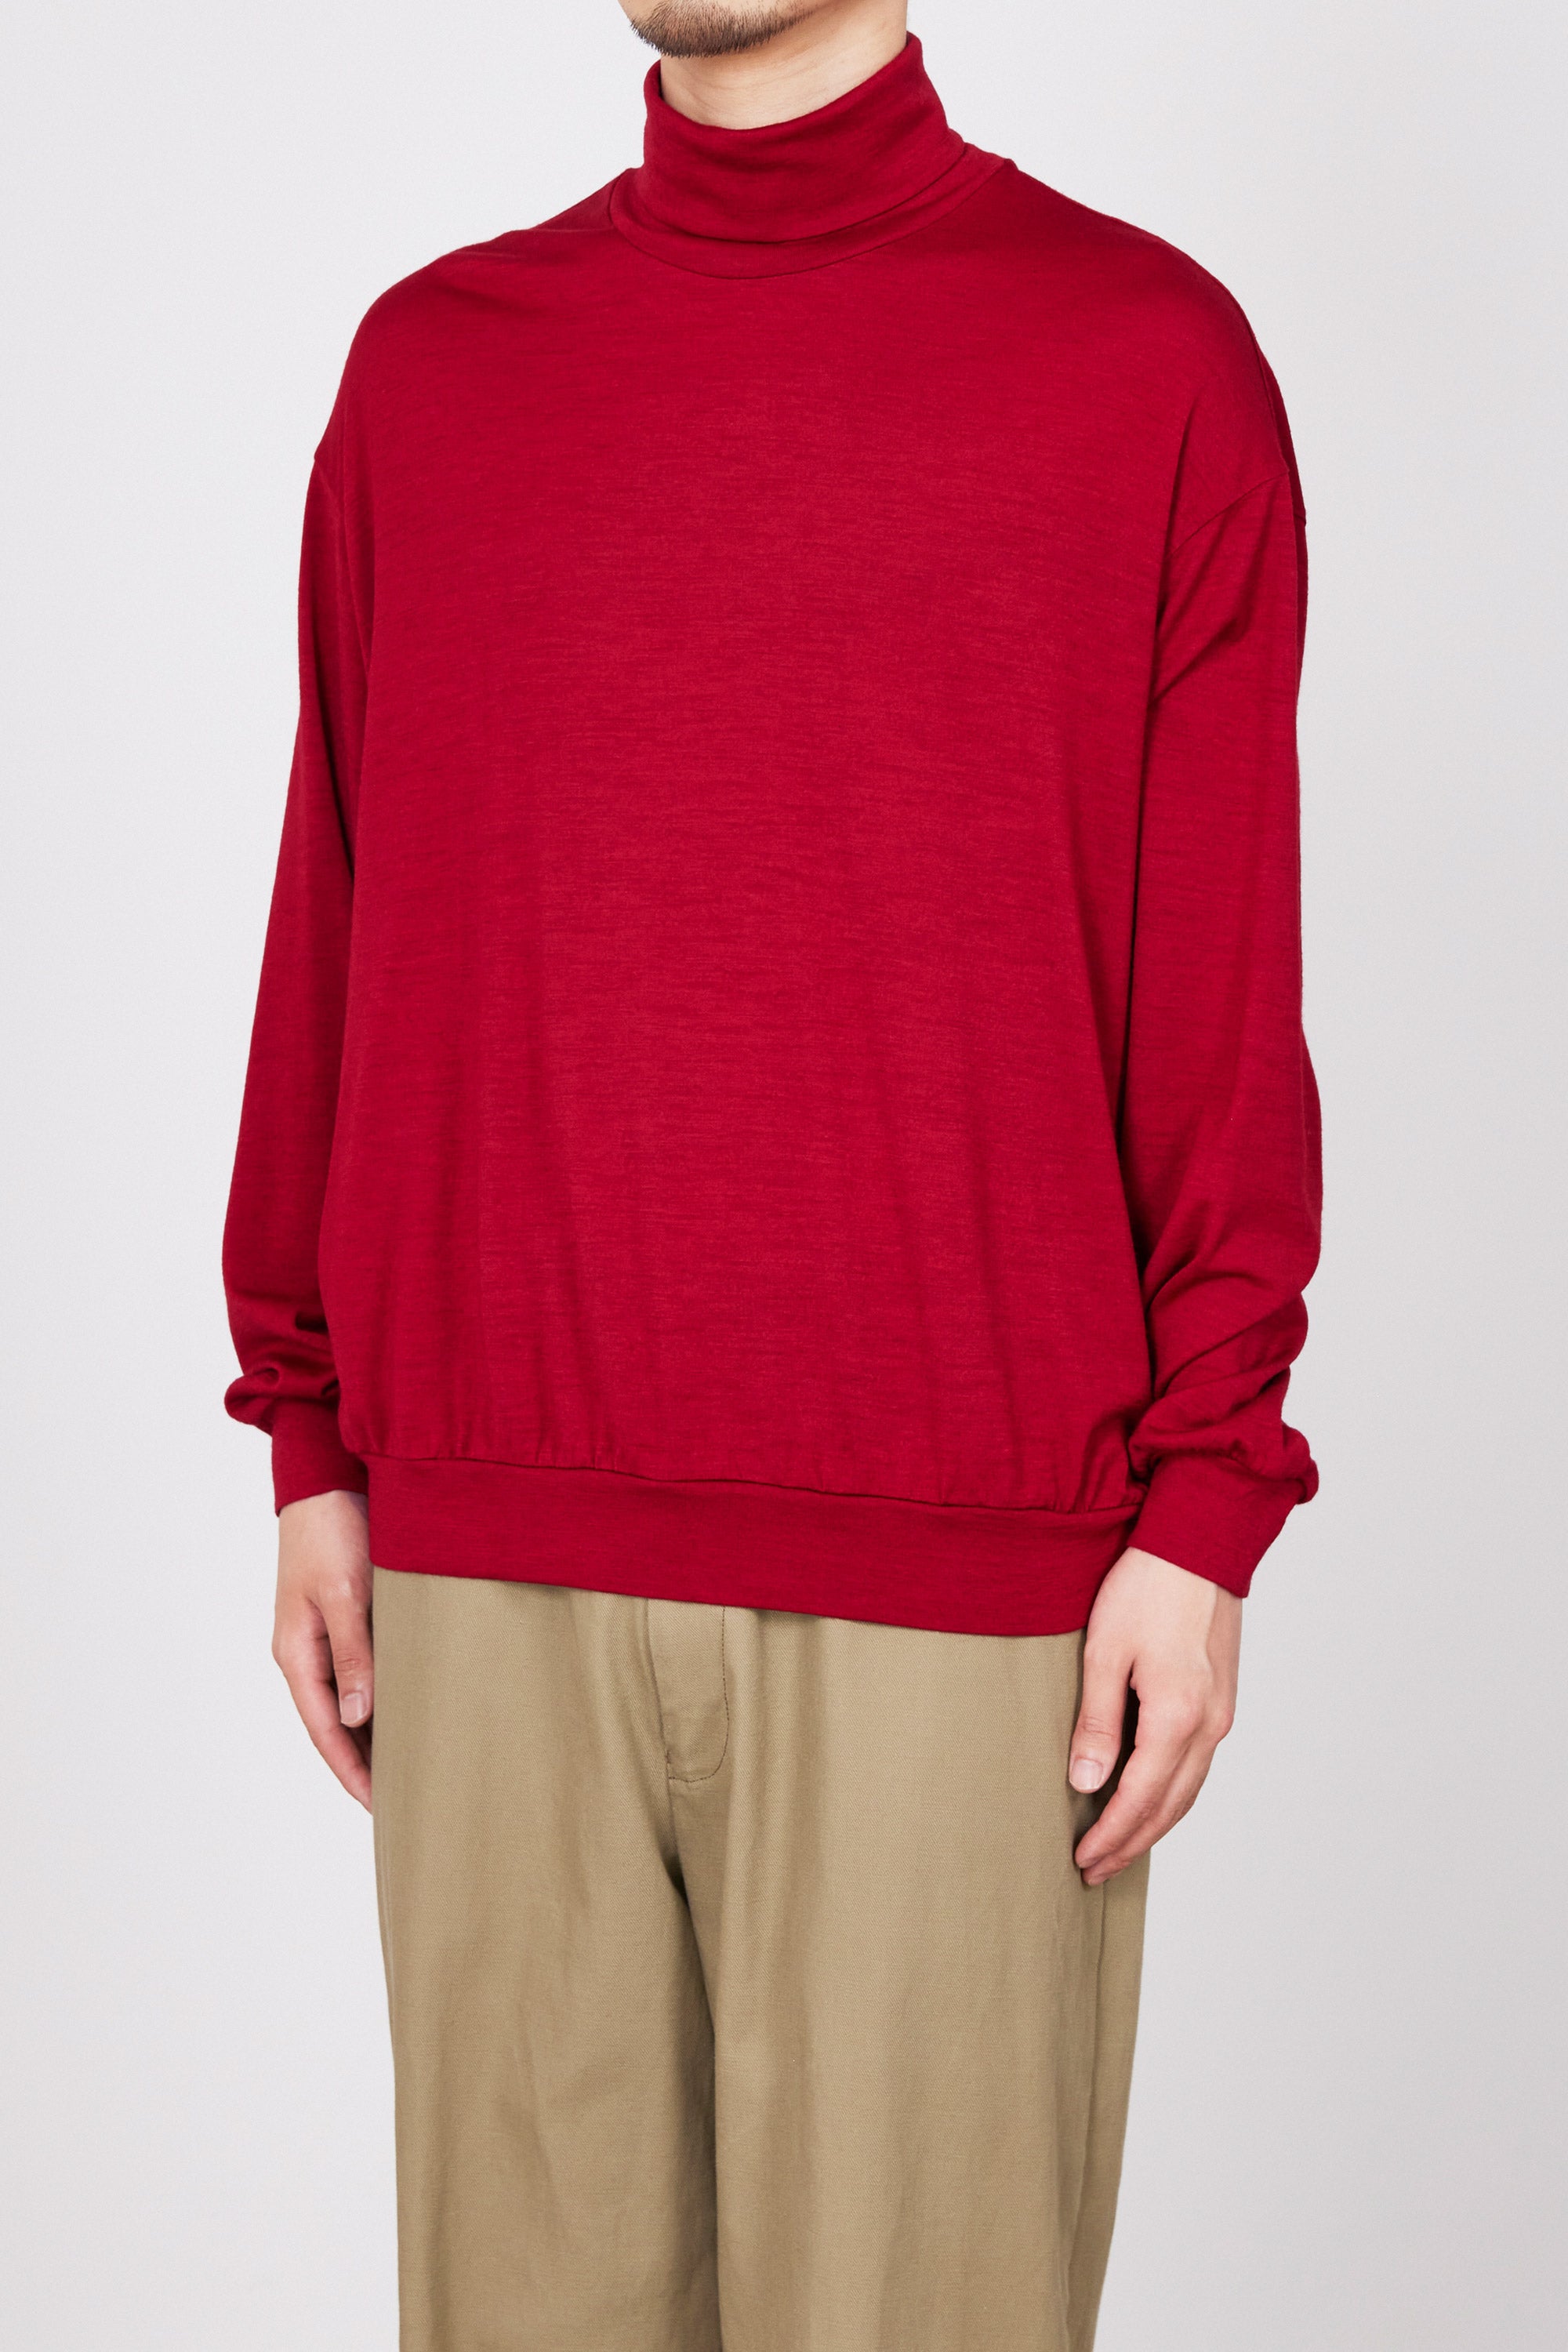 2/72 WOOL SINGLE JERSEY WASHABLE TURTLE NECK, Red